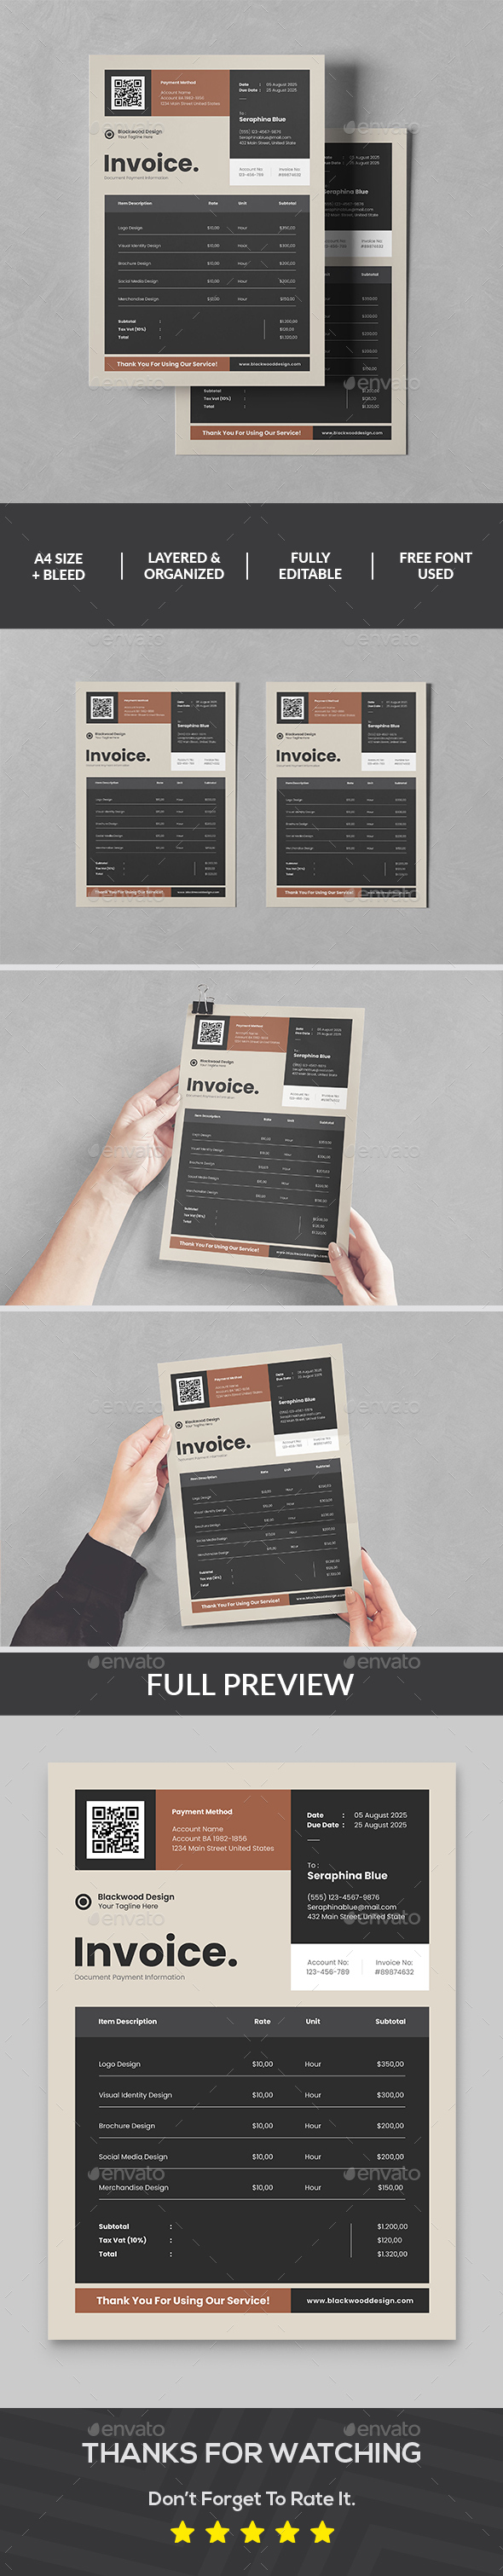 [DOWNLOAD]Invoice Template